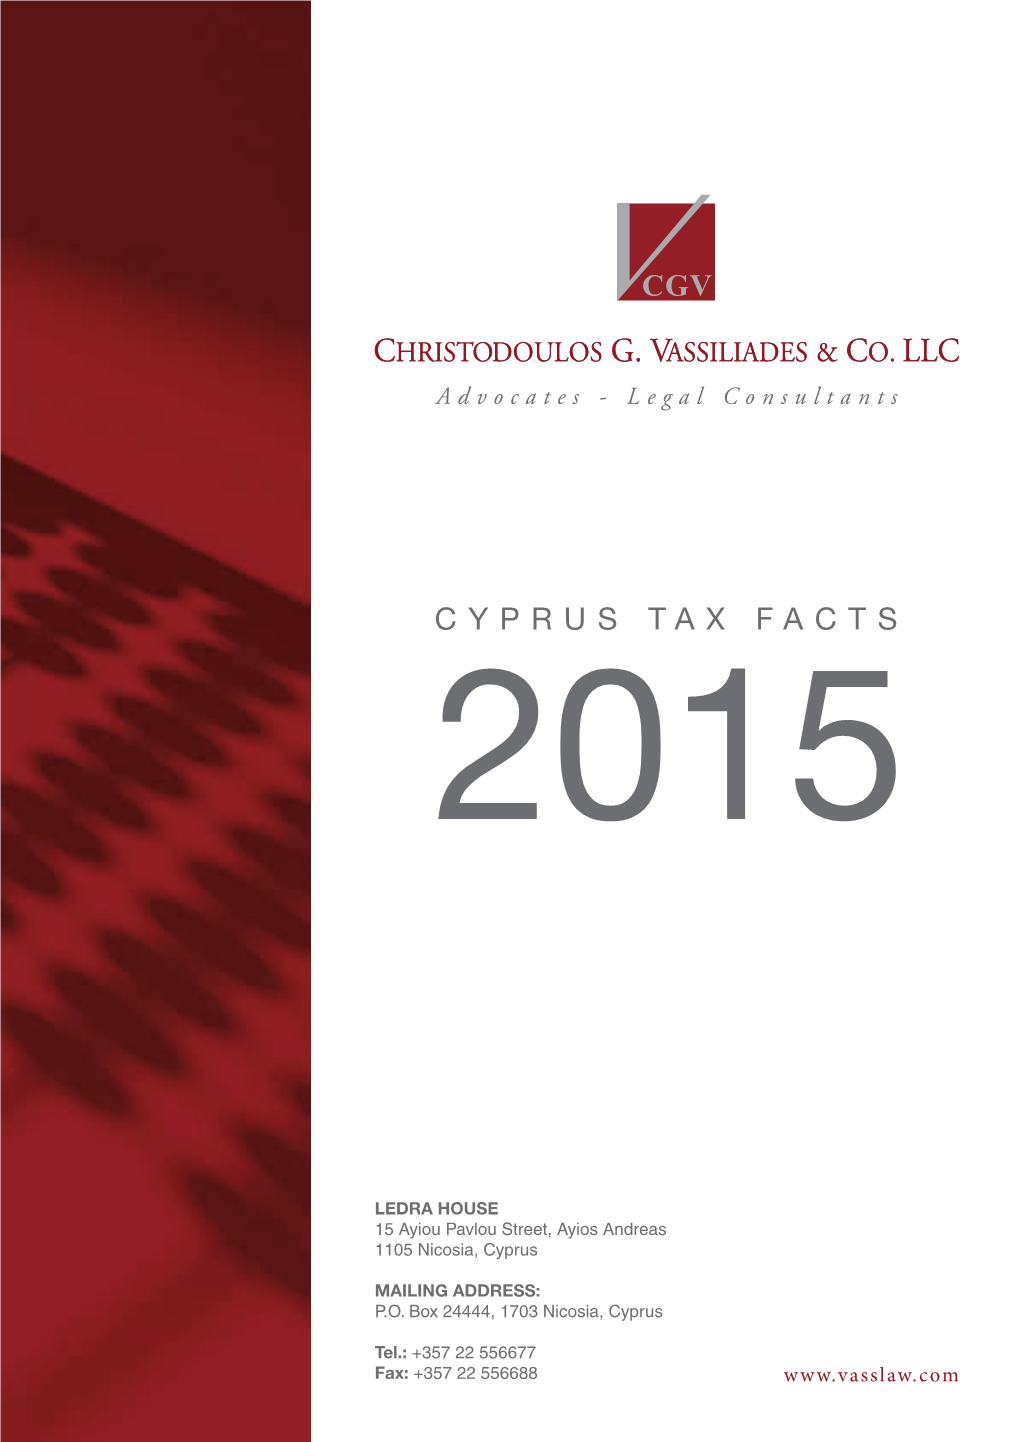 Cyprus Tax Facts 2015